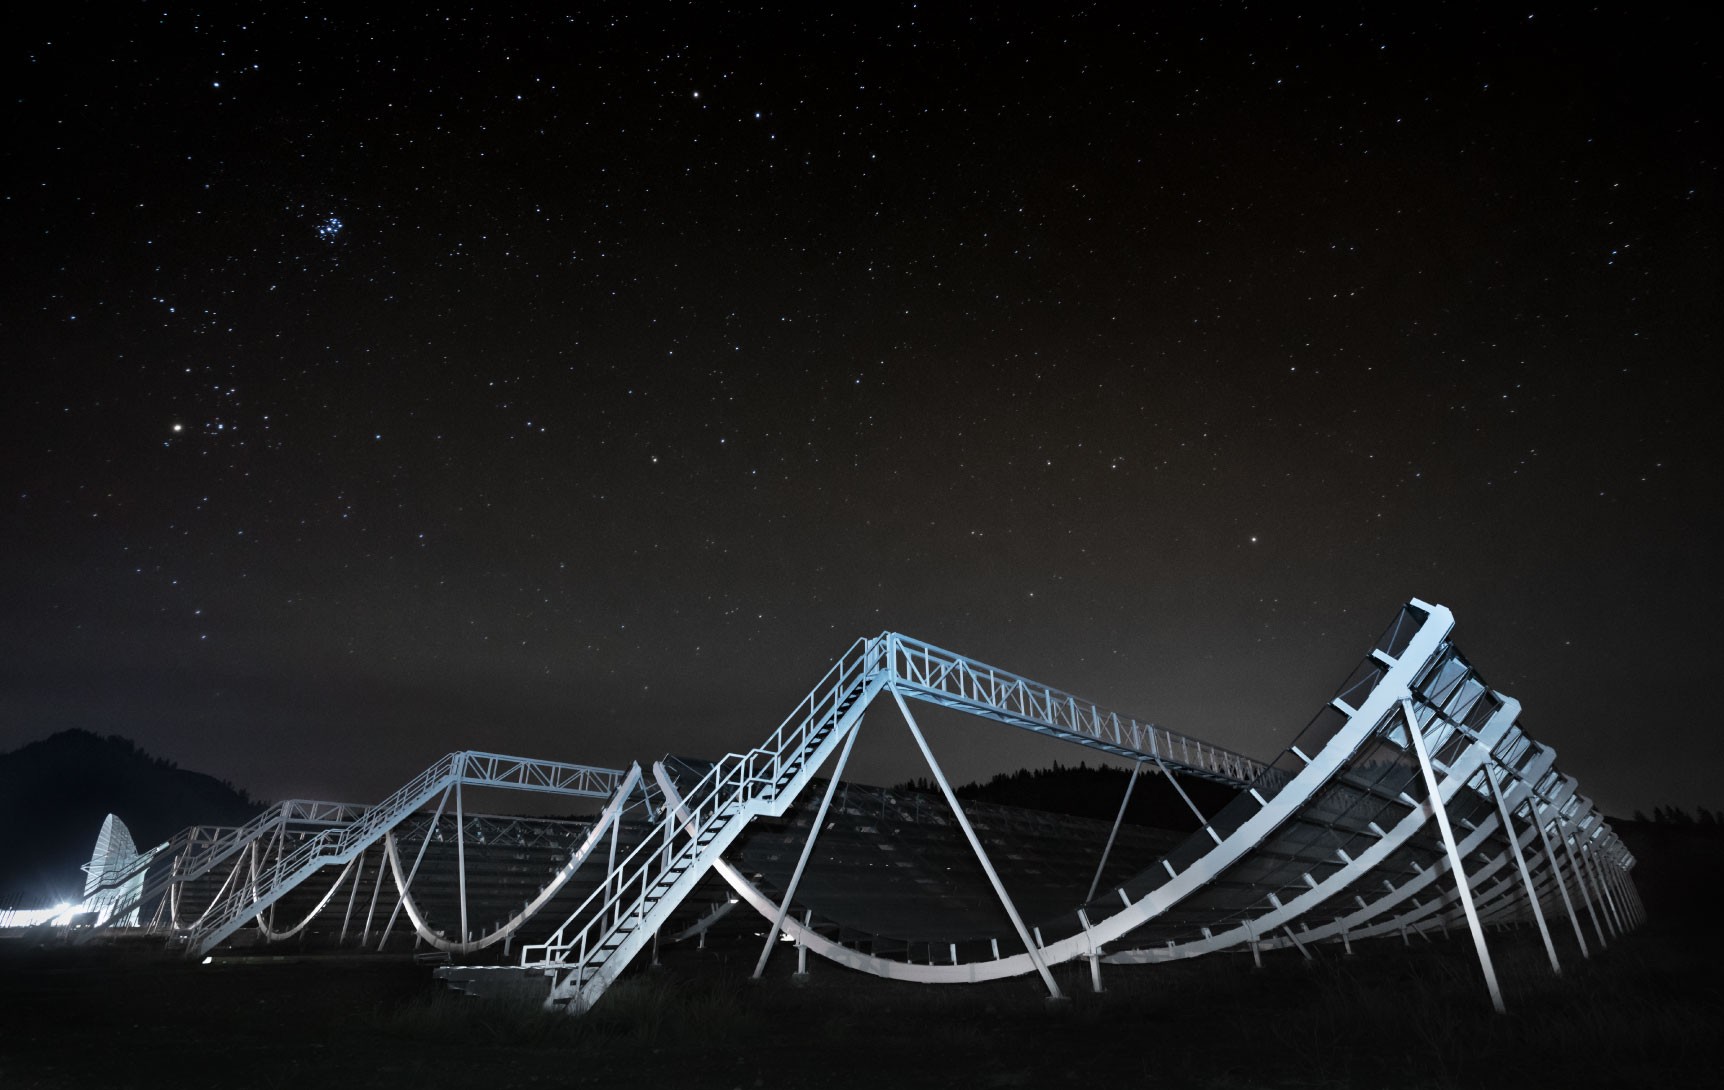 CHIME, a radio telescope, maps the universe under a starry night sky